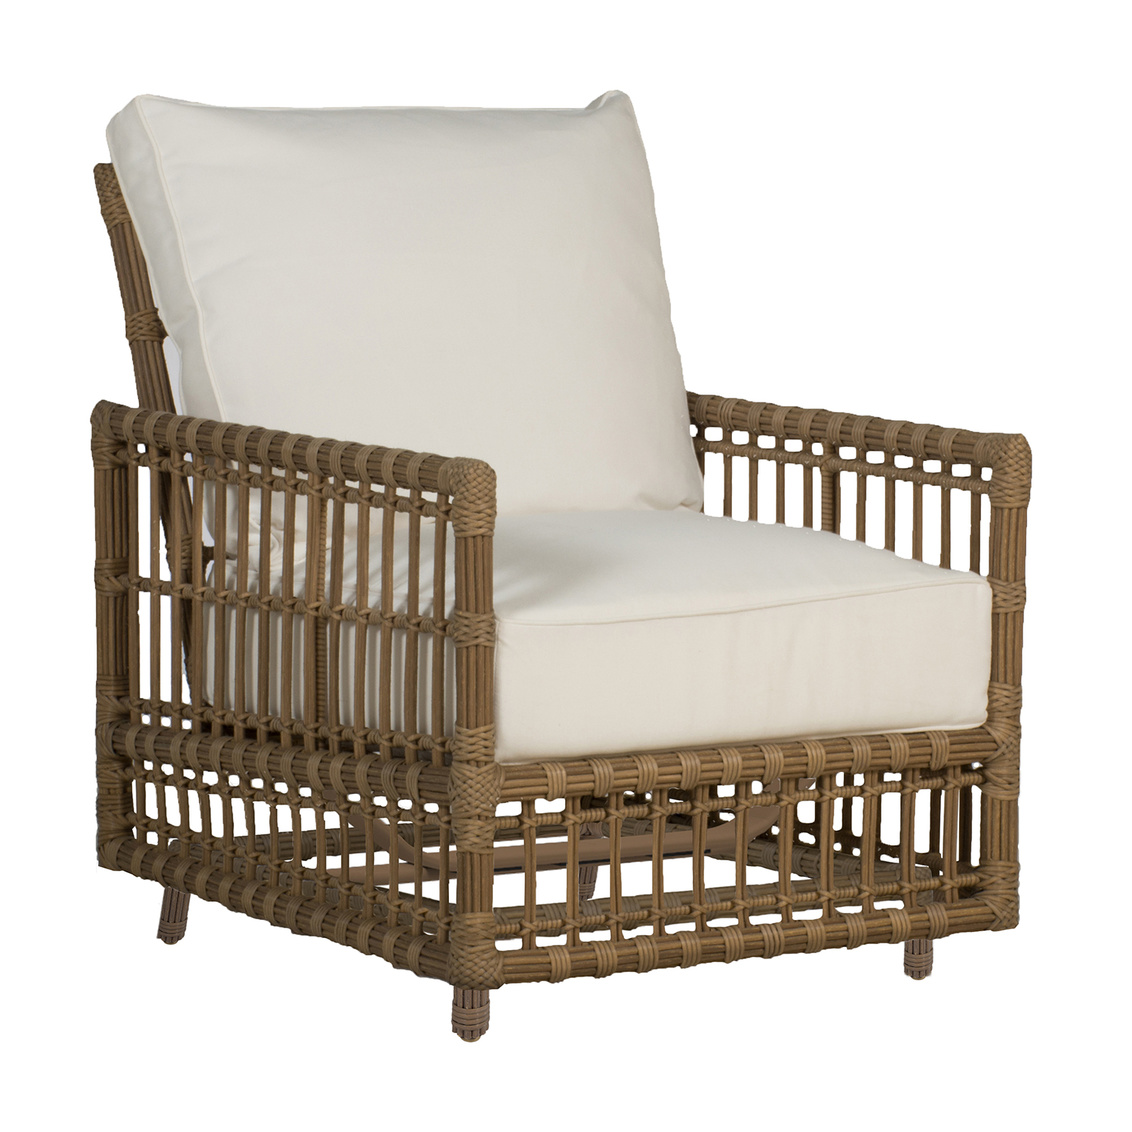 newport woven spring lounge in burlap – frame only product image